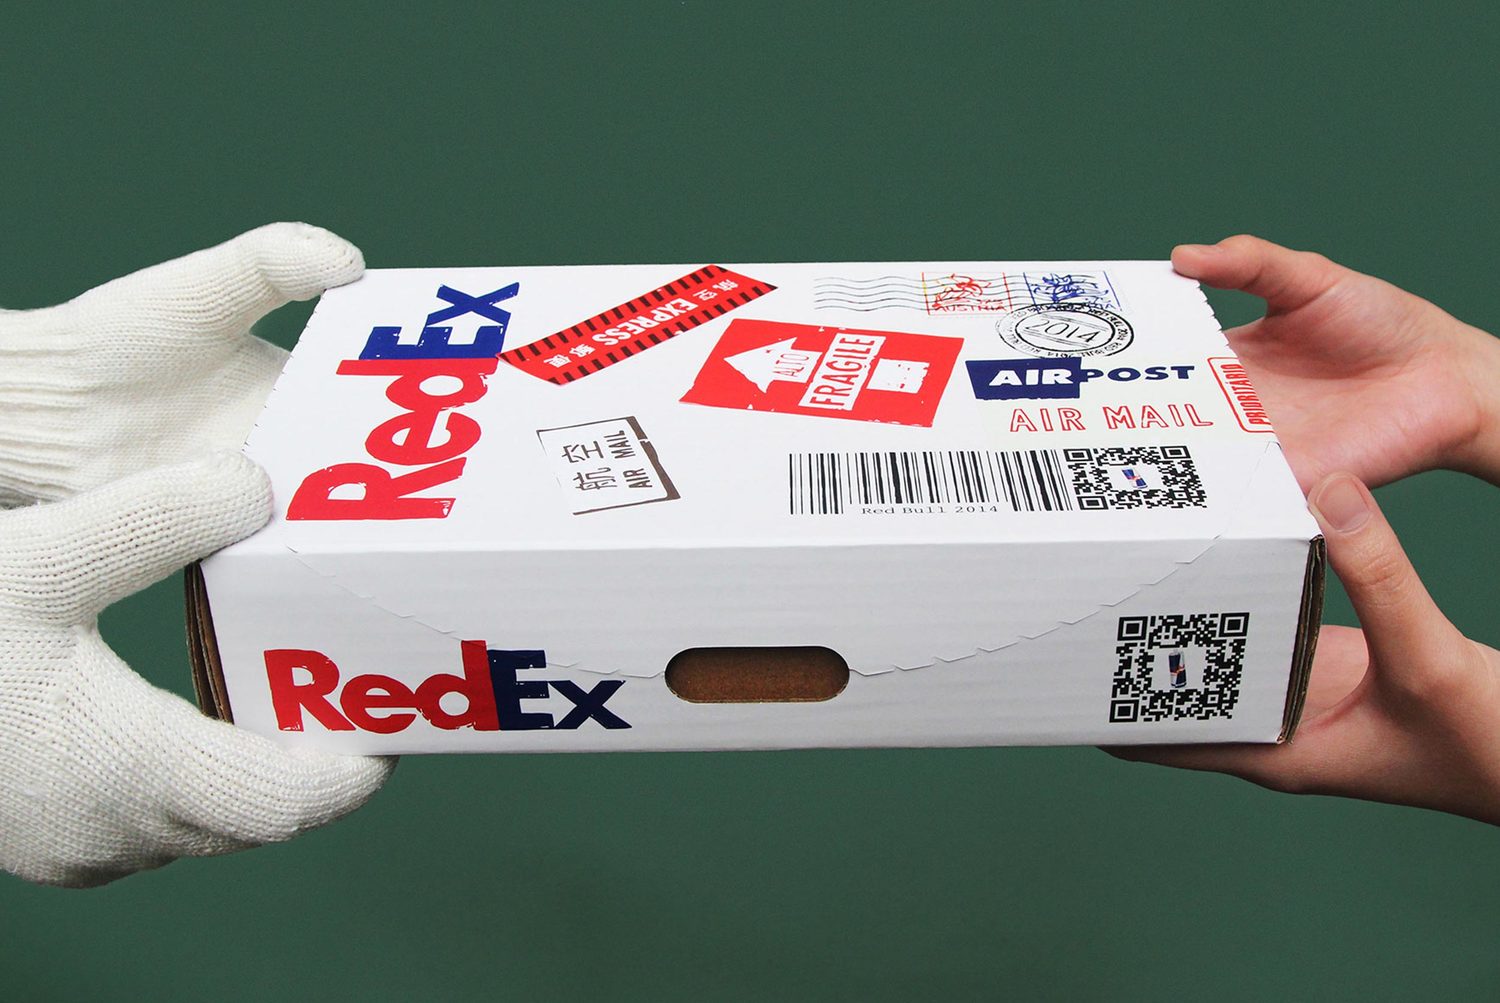  For our launch pack, we used the insight that a FedEx package meant high valued goods sent from abroad. 